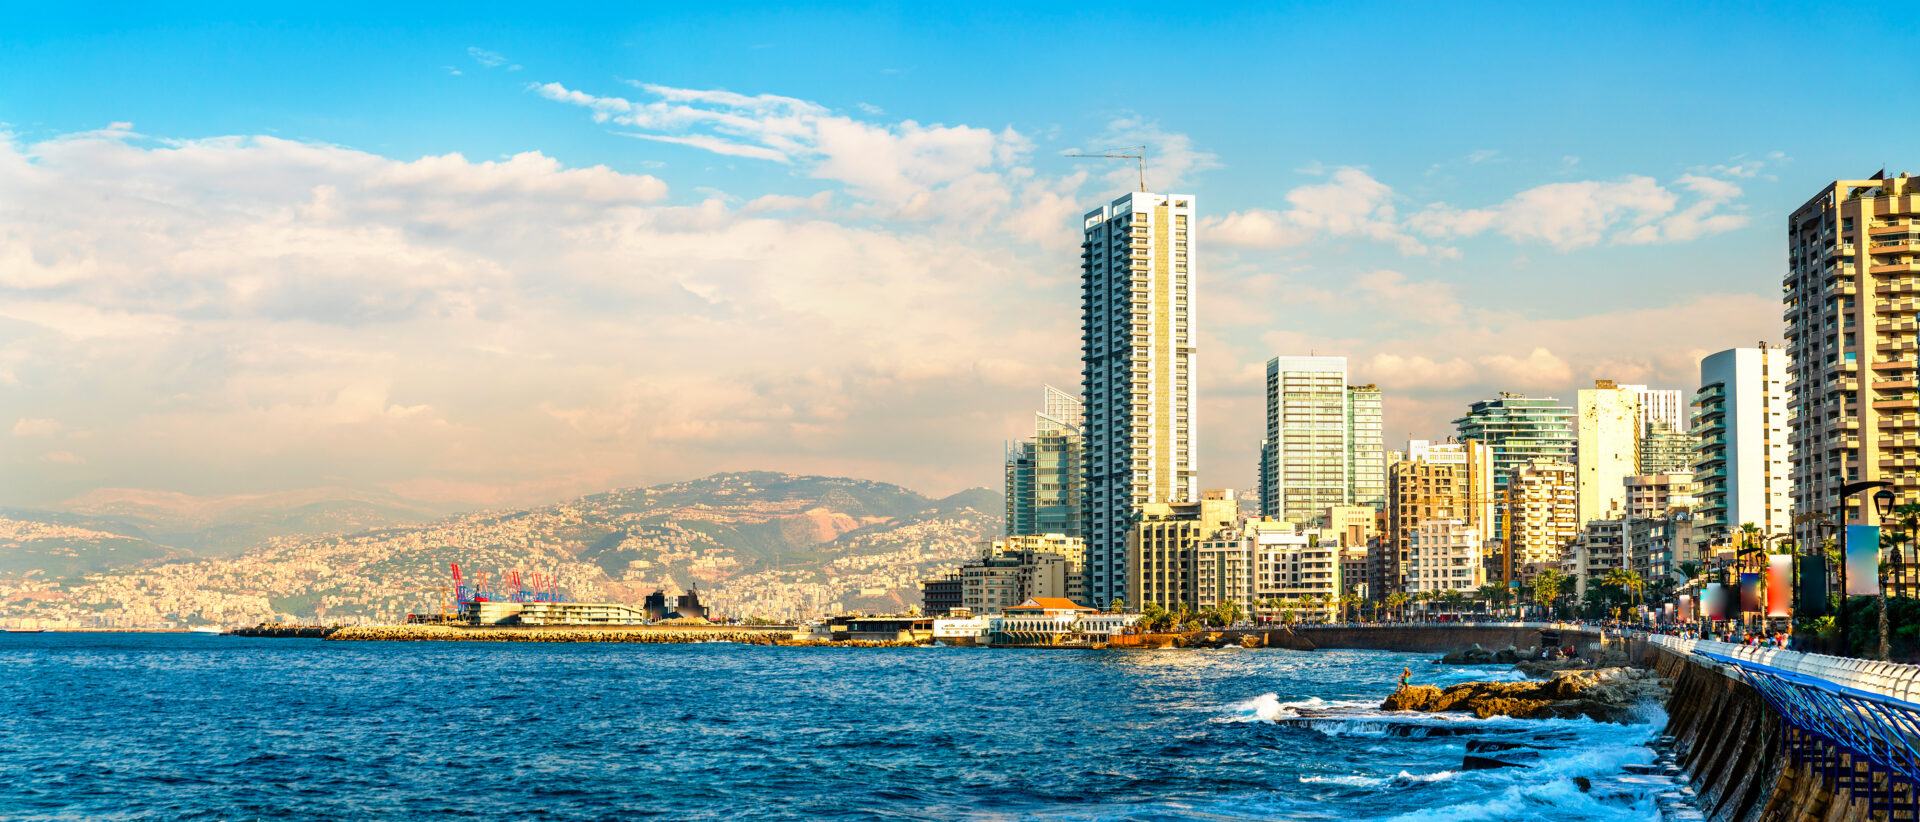 Beirut travel guide